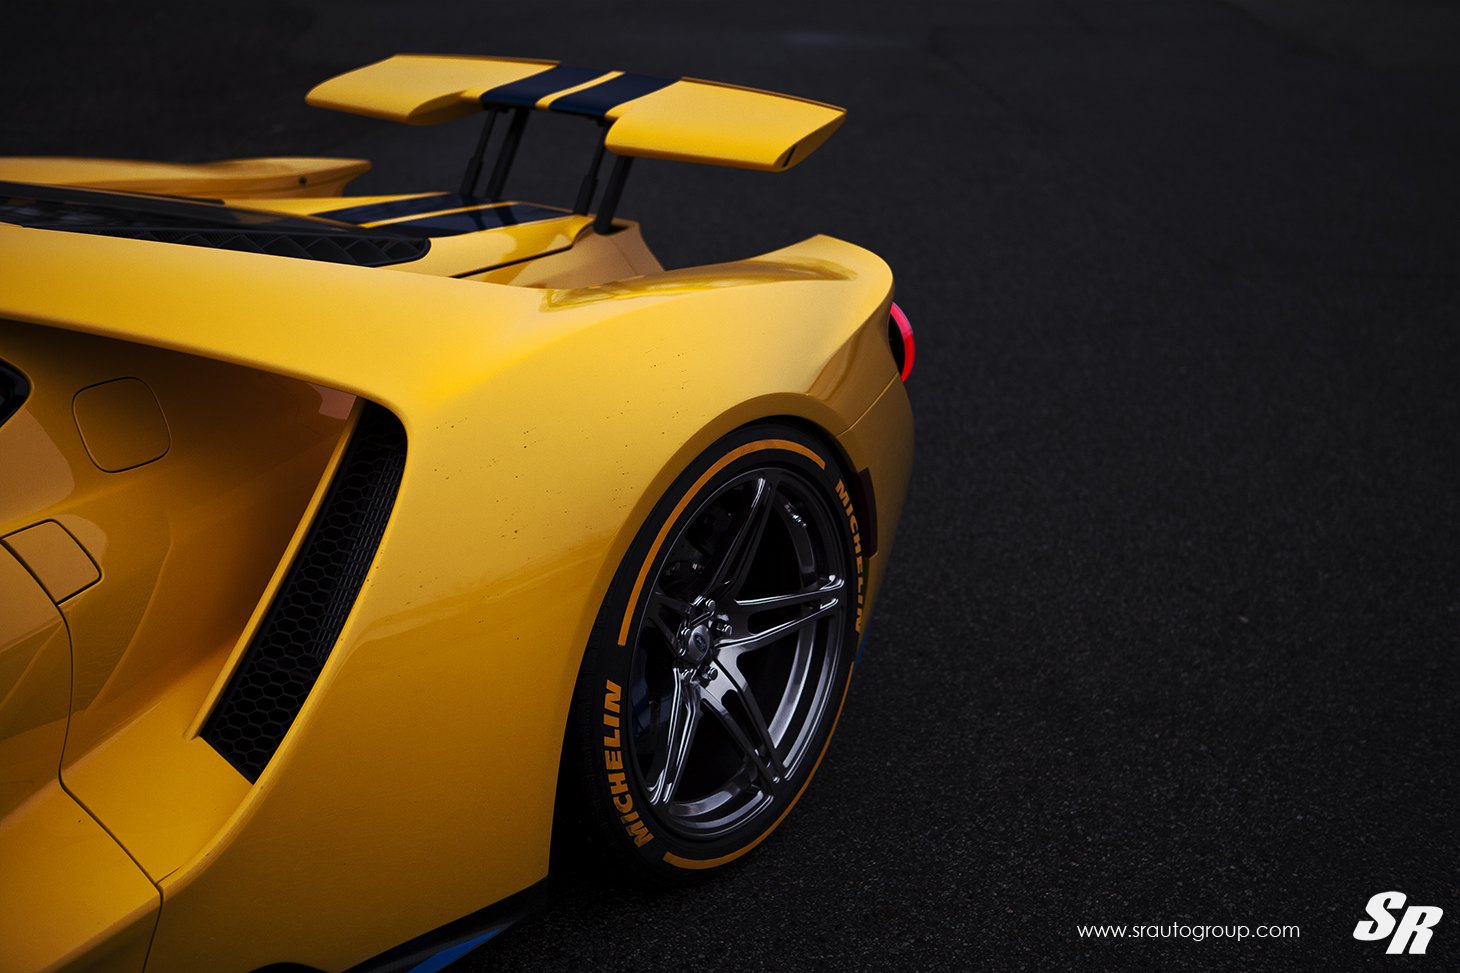 Aftermarket Side Scoops on Yellow Ford GT - Photo by SR Auto Group